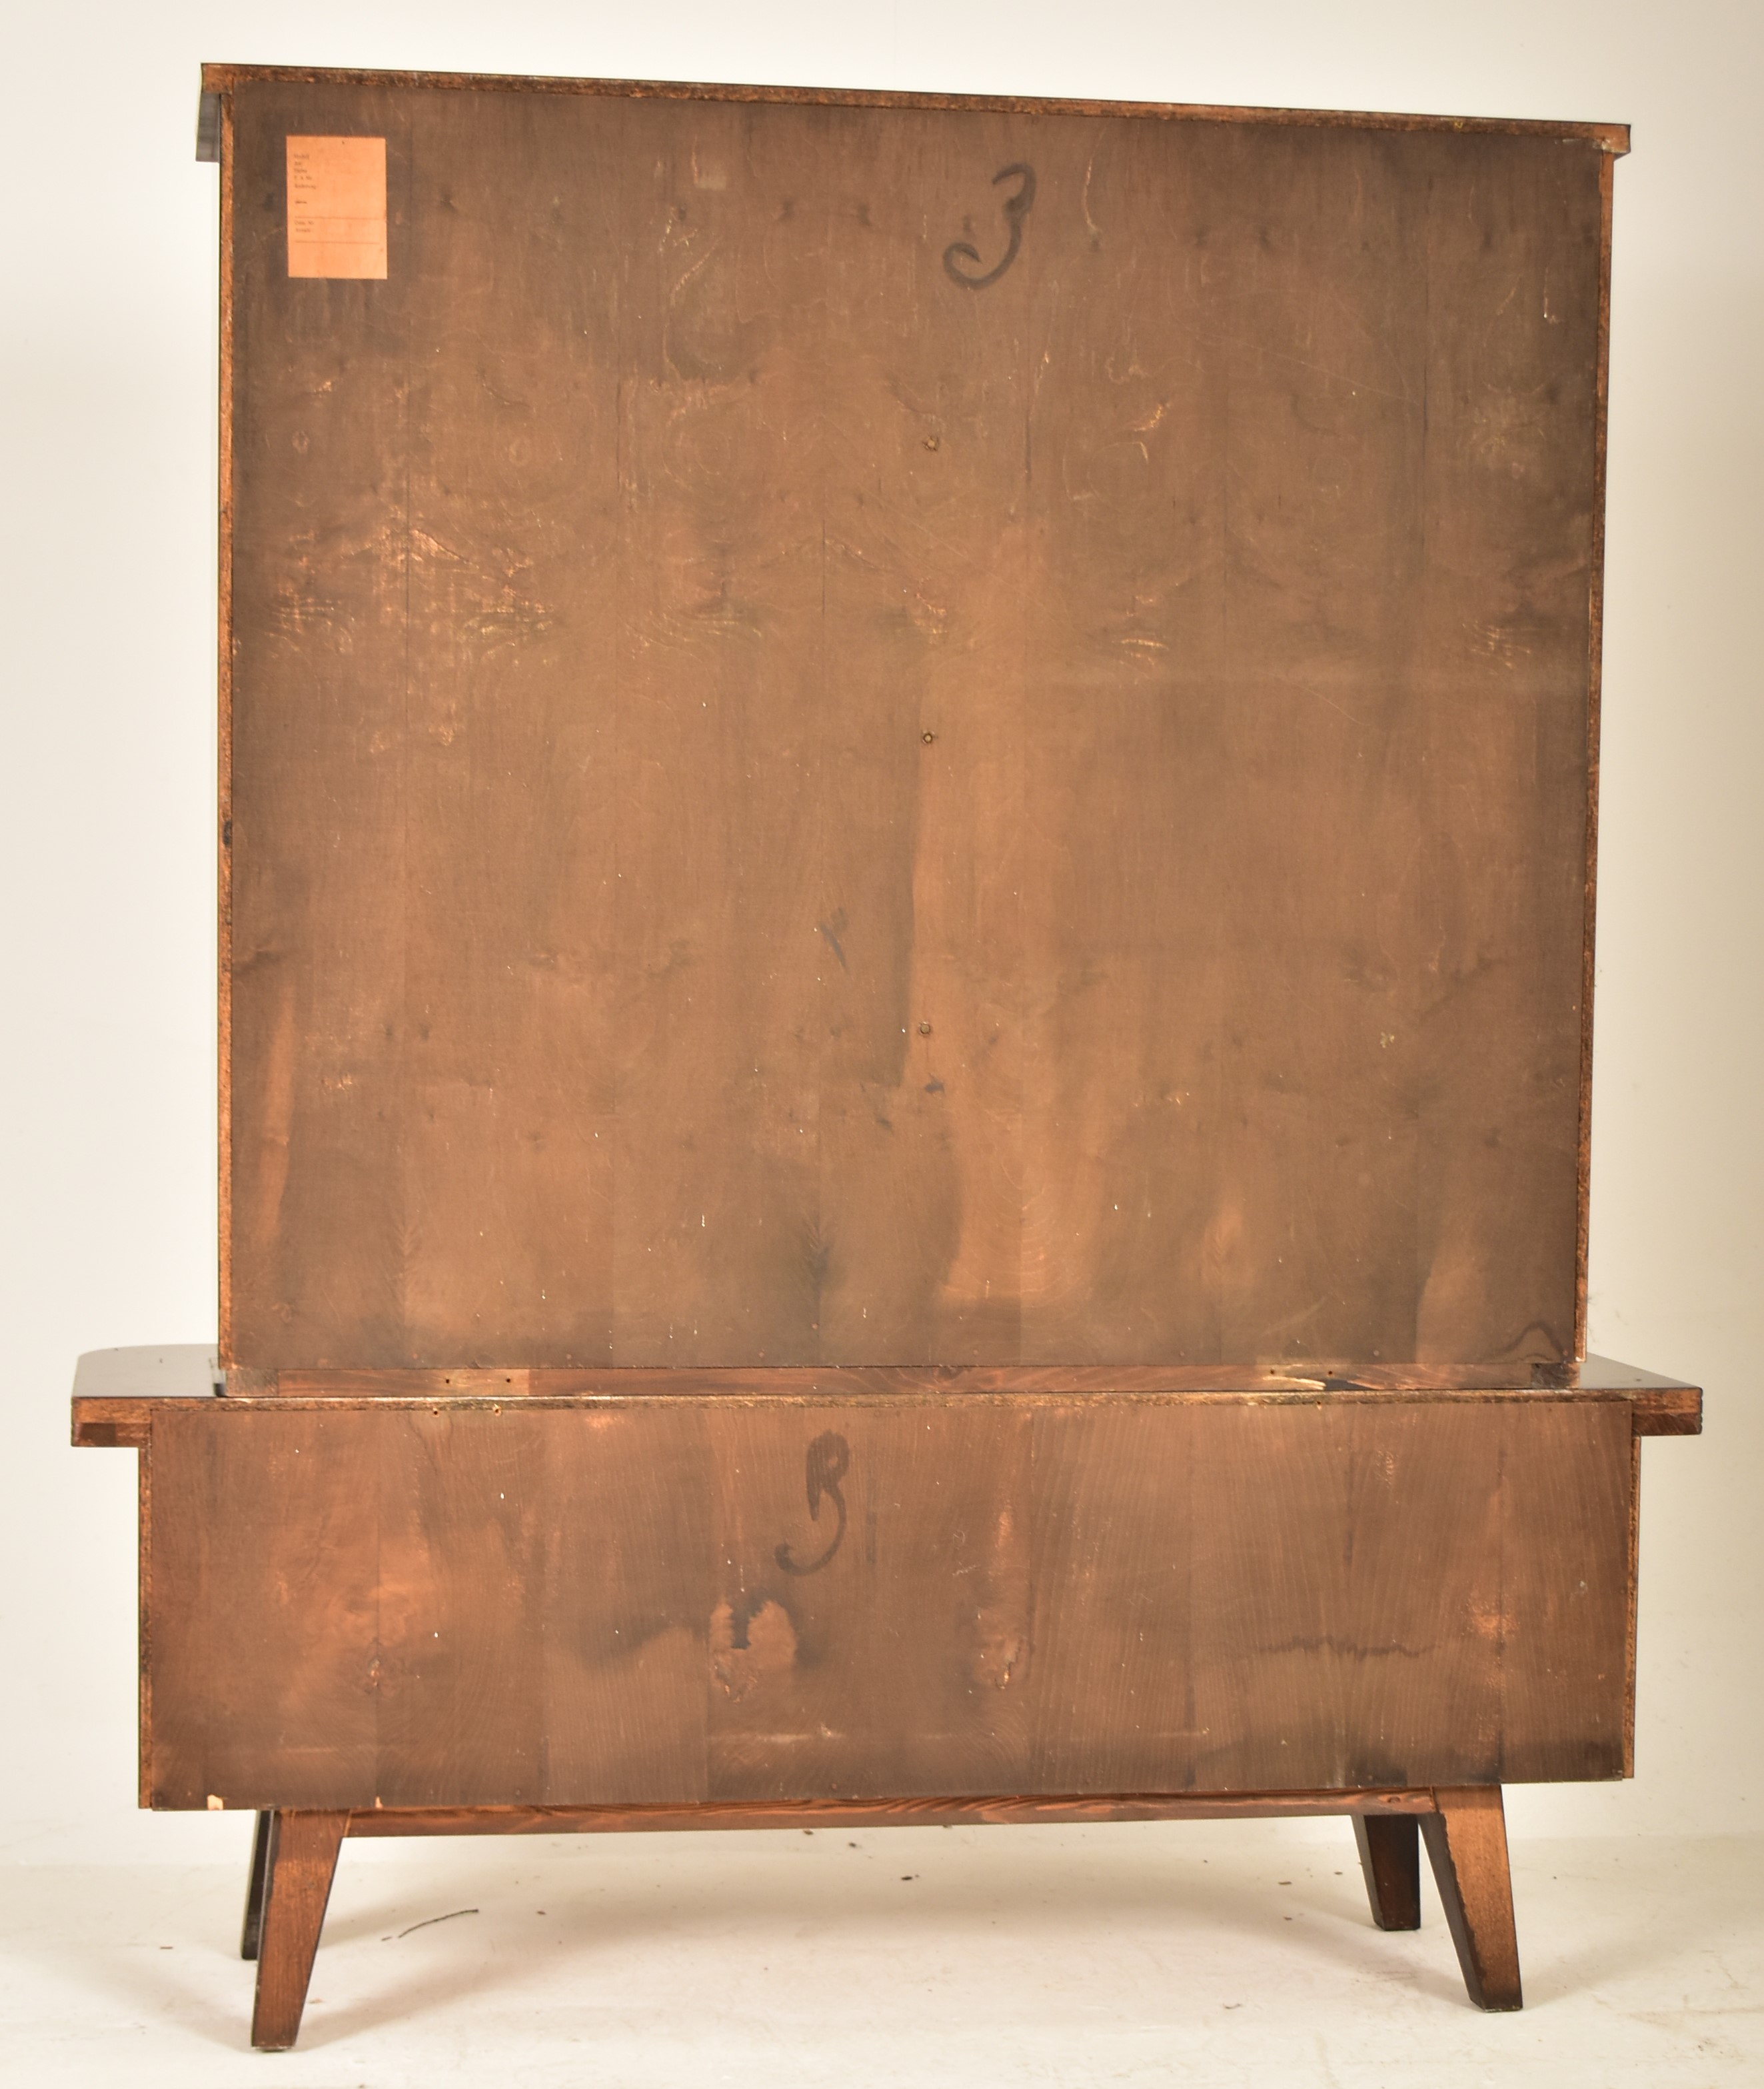 MID 20TH CENTURY GERMAN DESIGNER CABINET ON STAND - Image 7 of 7